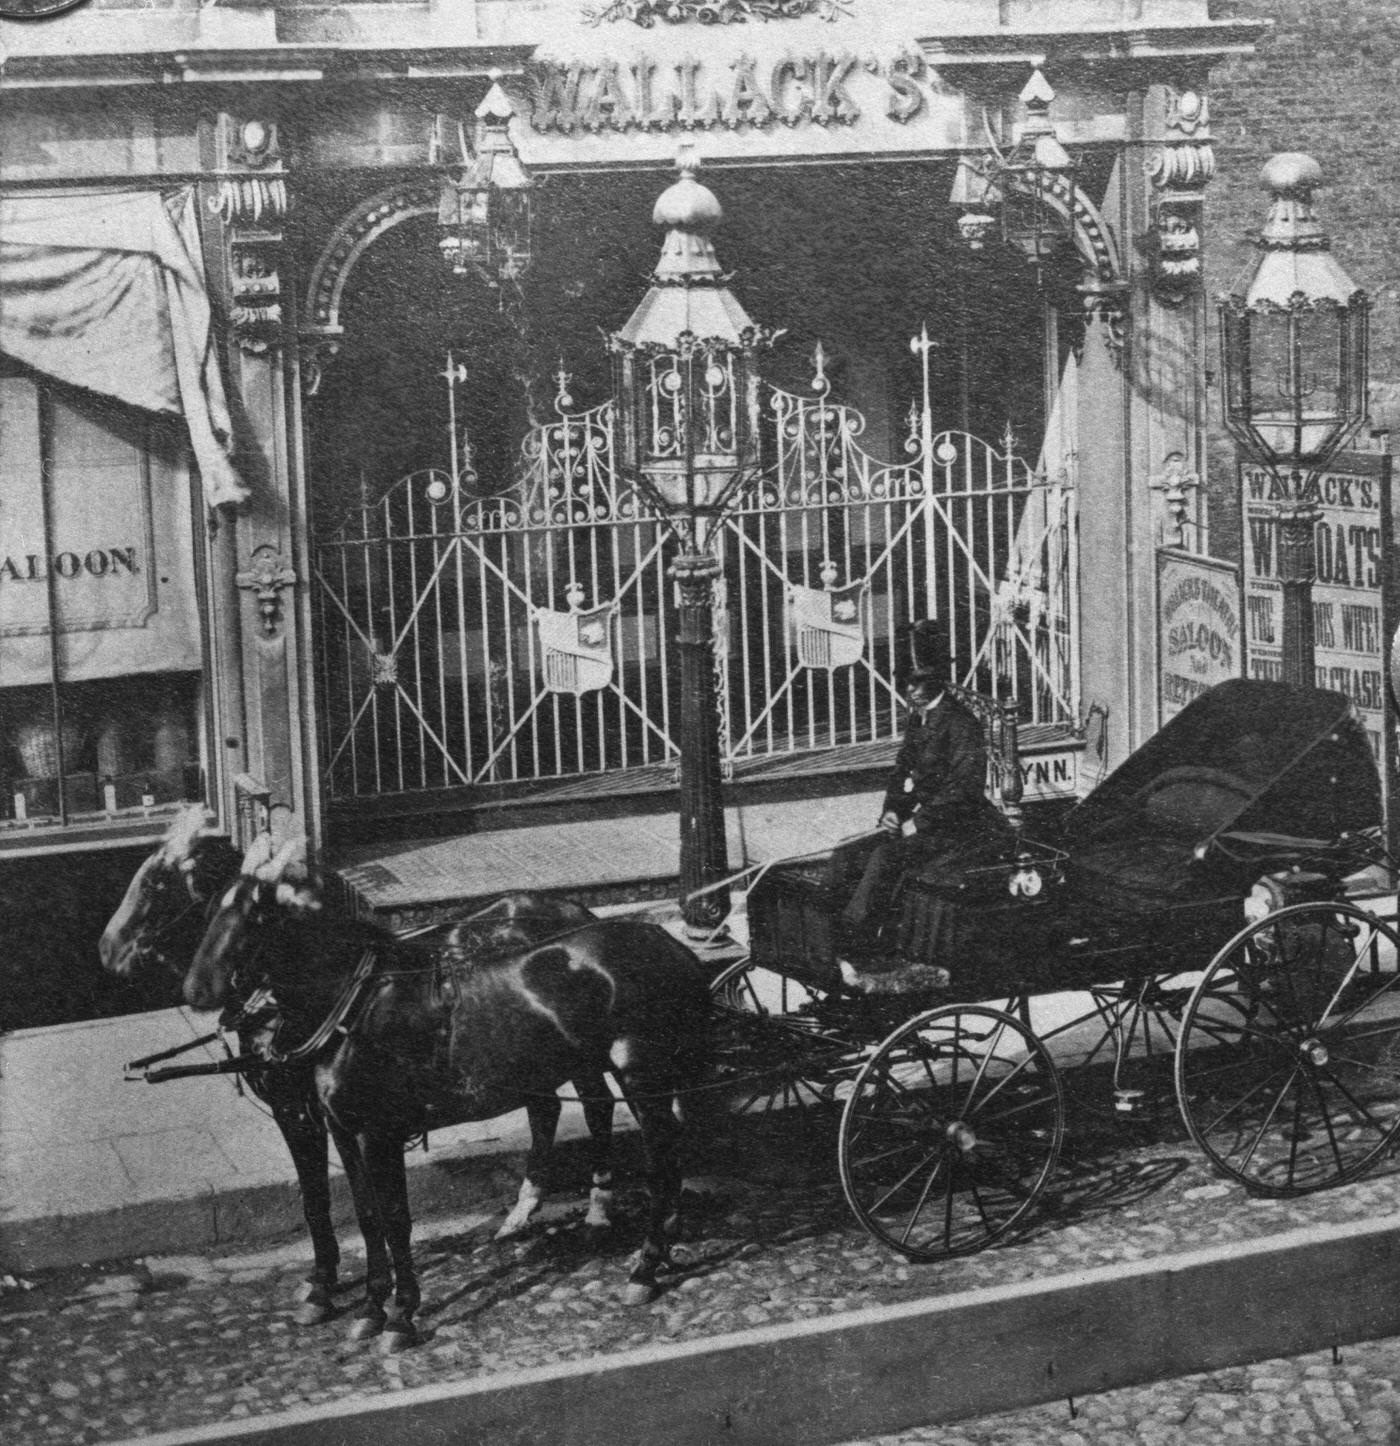 Outside Wallack'S Theatre On Broadway, New York City, 1870